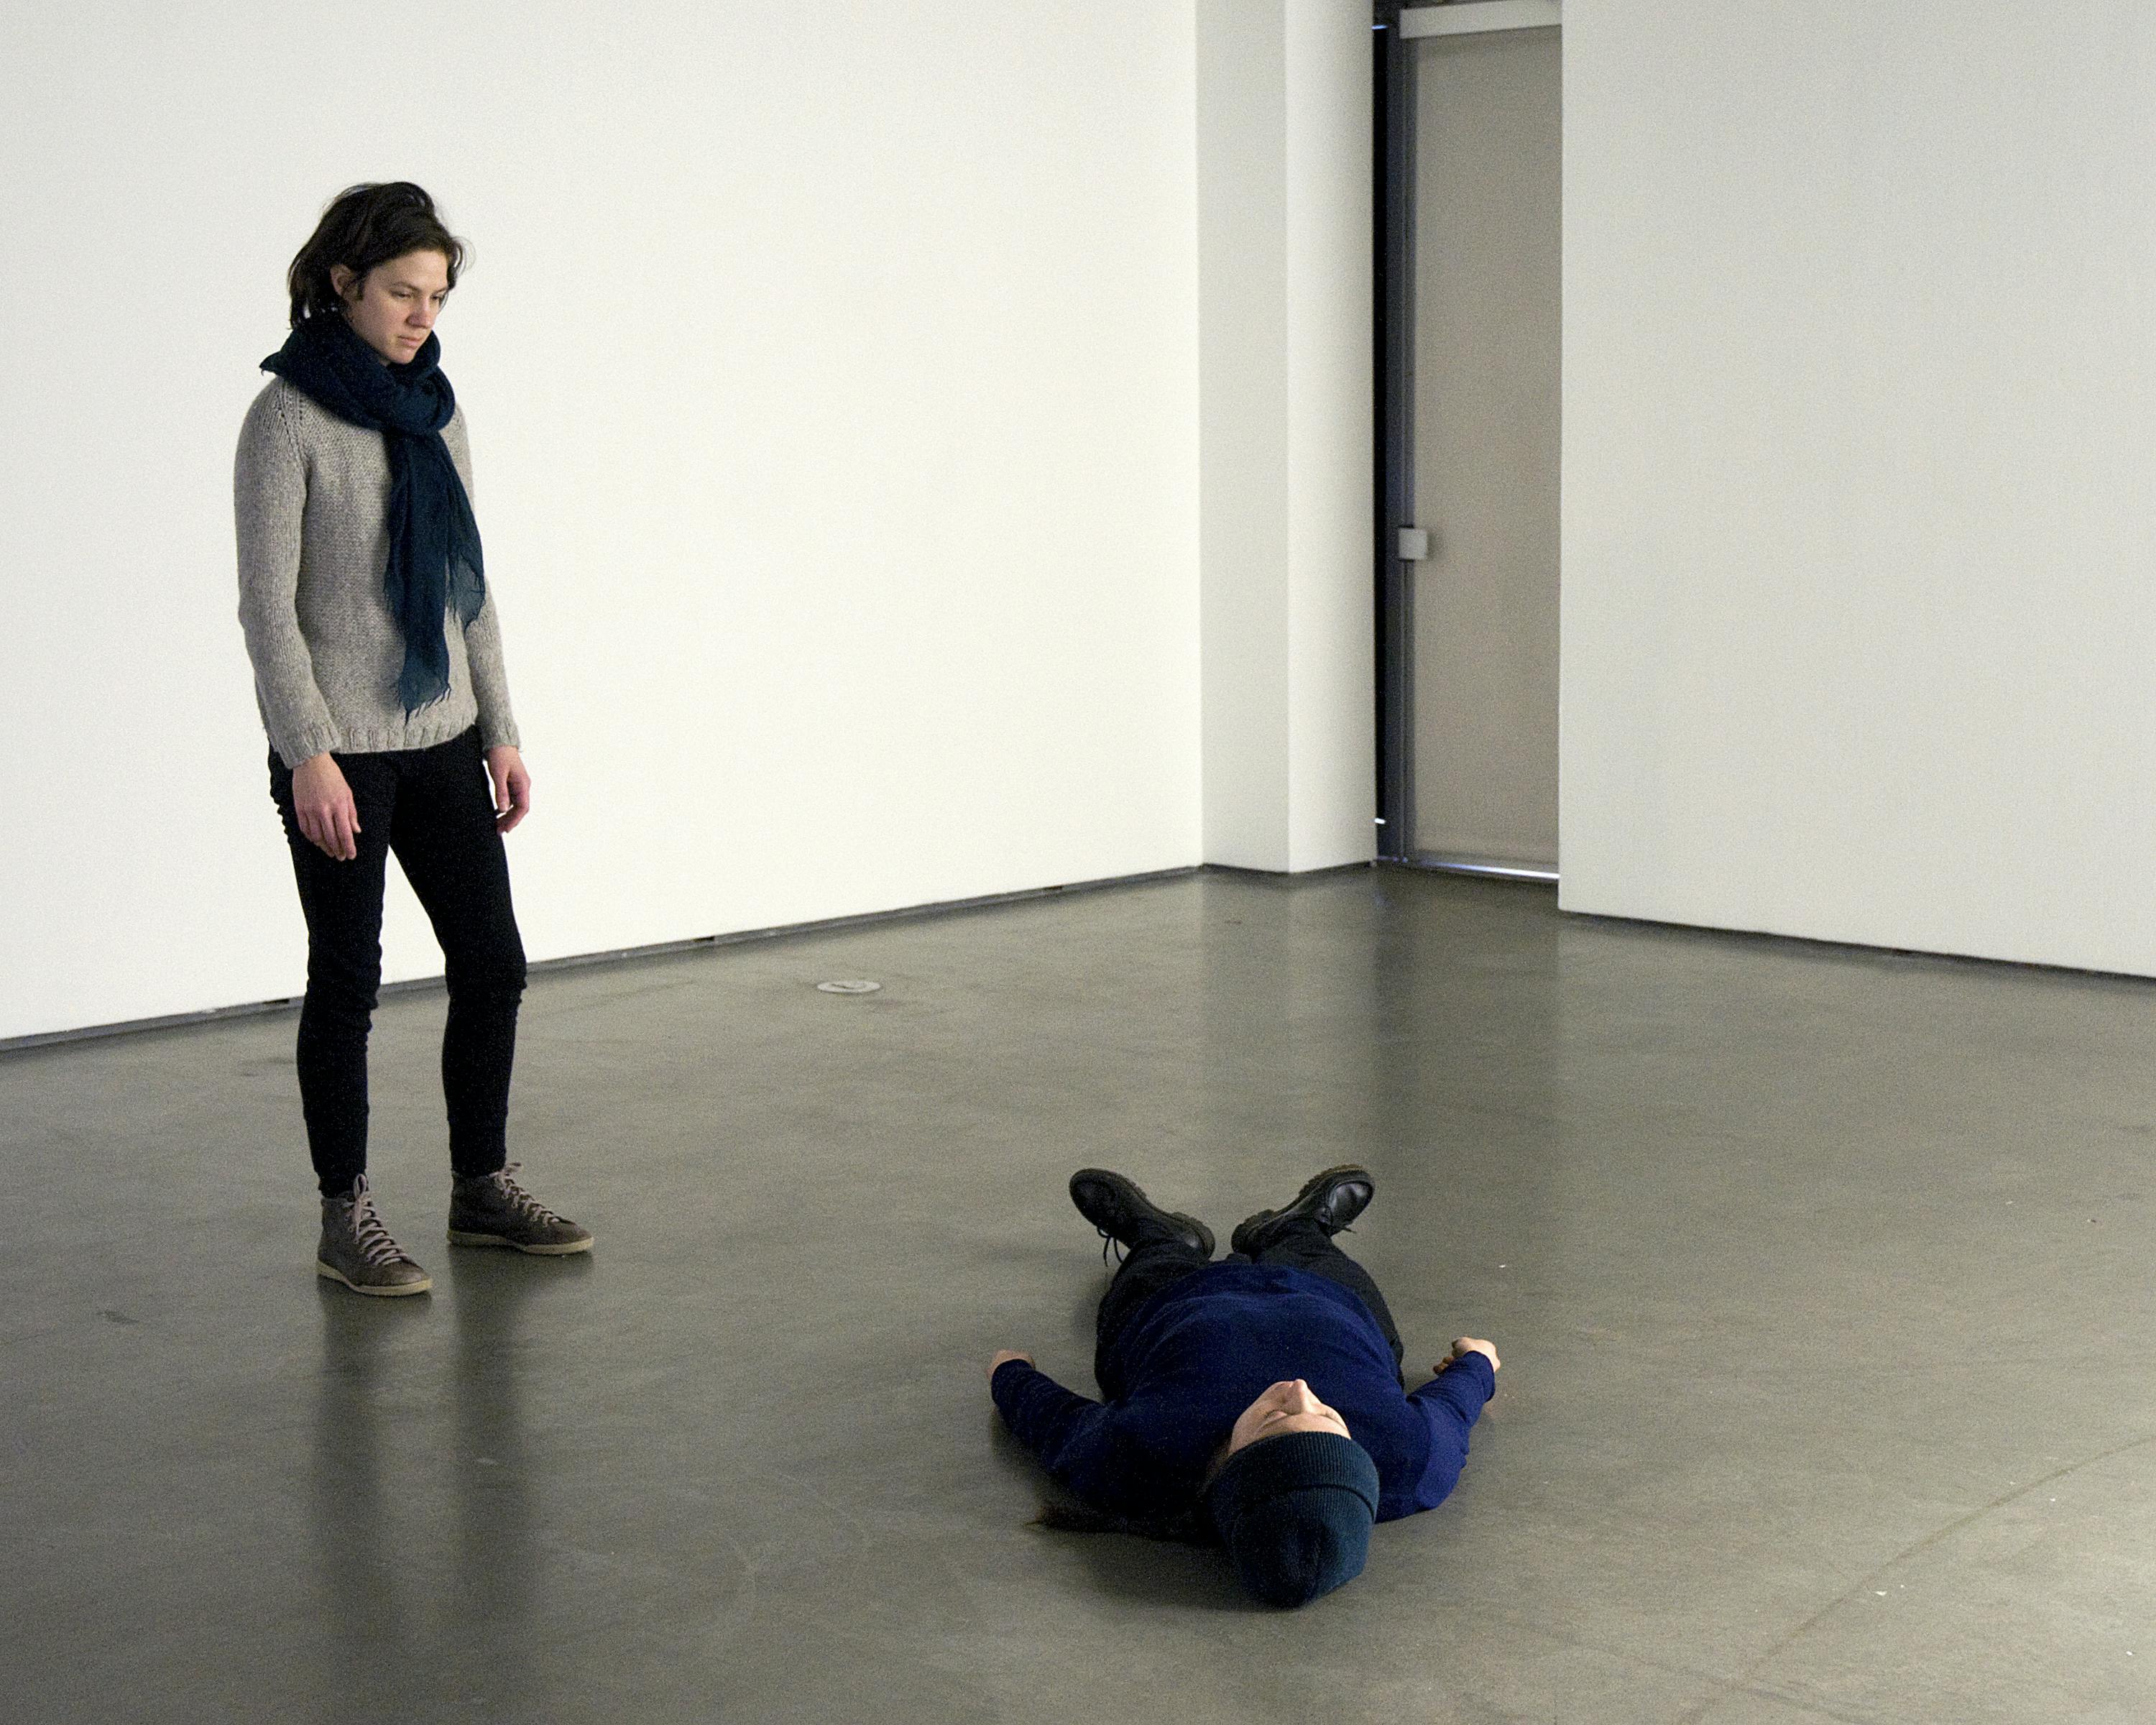 Two women are performing in a gallery space. A woman wearing a blue-green scarf is standing straight and looking down at a woman in a navy-coloured shirt, who is lying down on the floor.